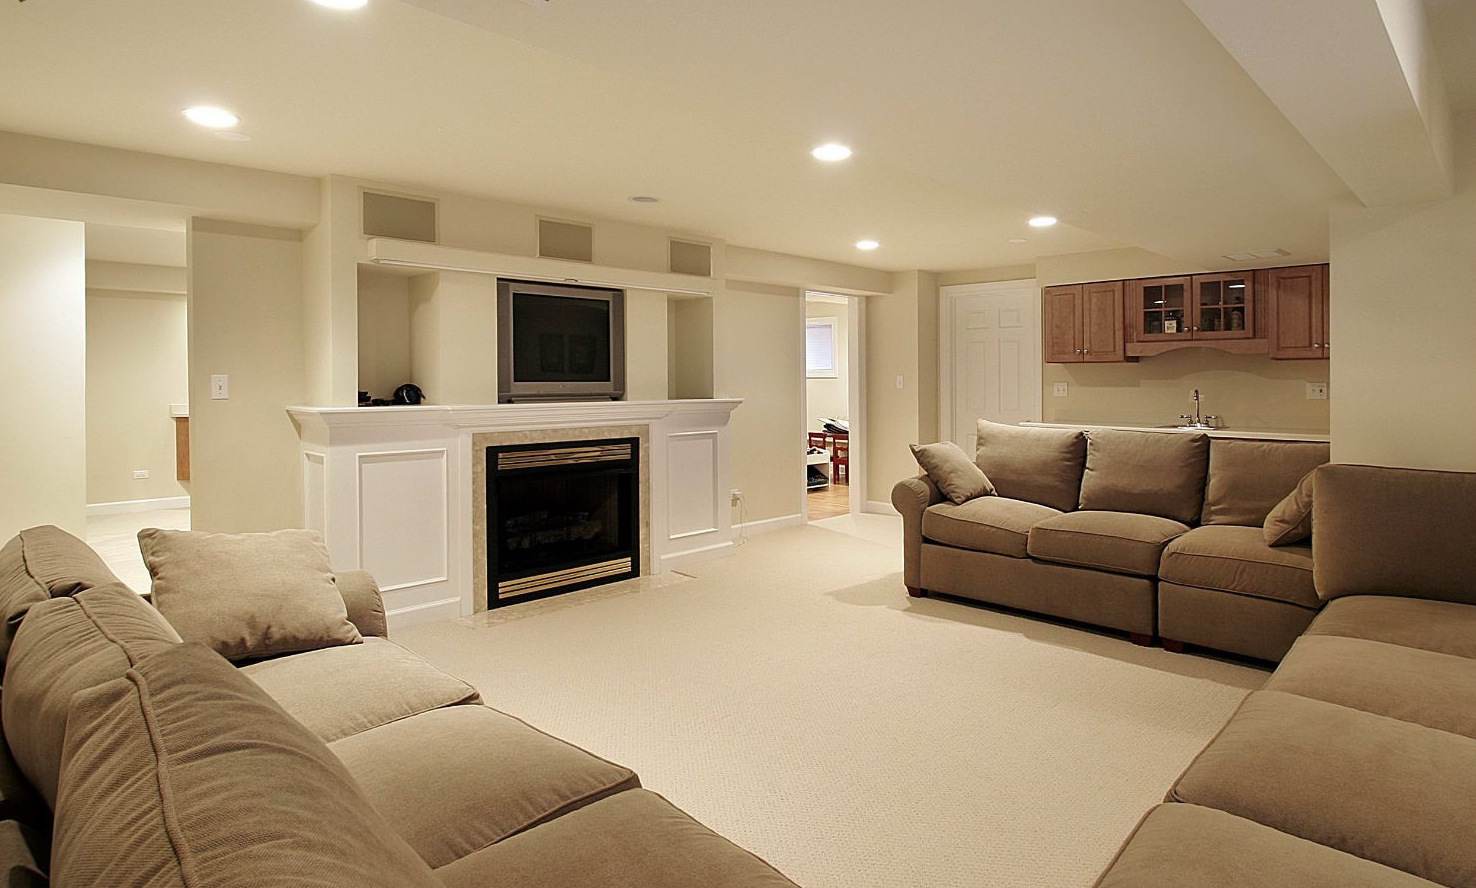 Paint Colors Wall Basement Paint Colors With White Wall Design Combined With Beige Fabric Sofa In Traditional Style Completed With White TV Cabinet Basement Basement Paint Colors For Soothing Purpose